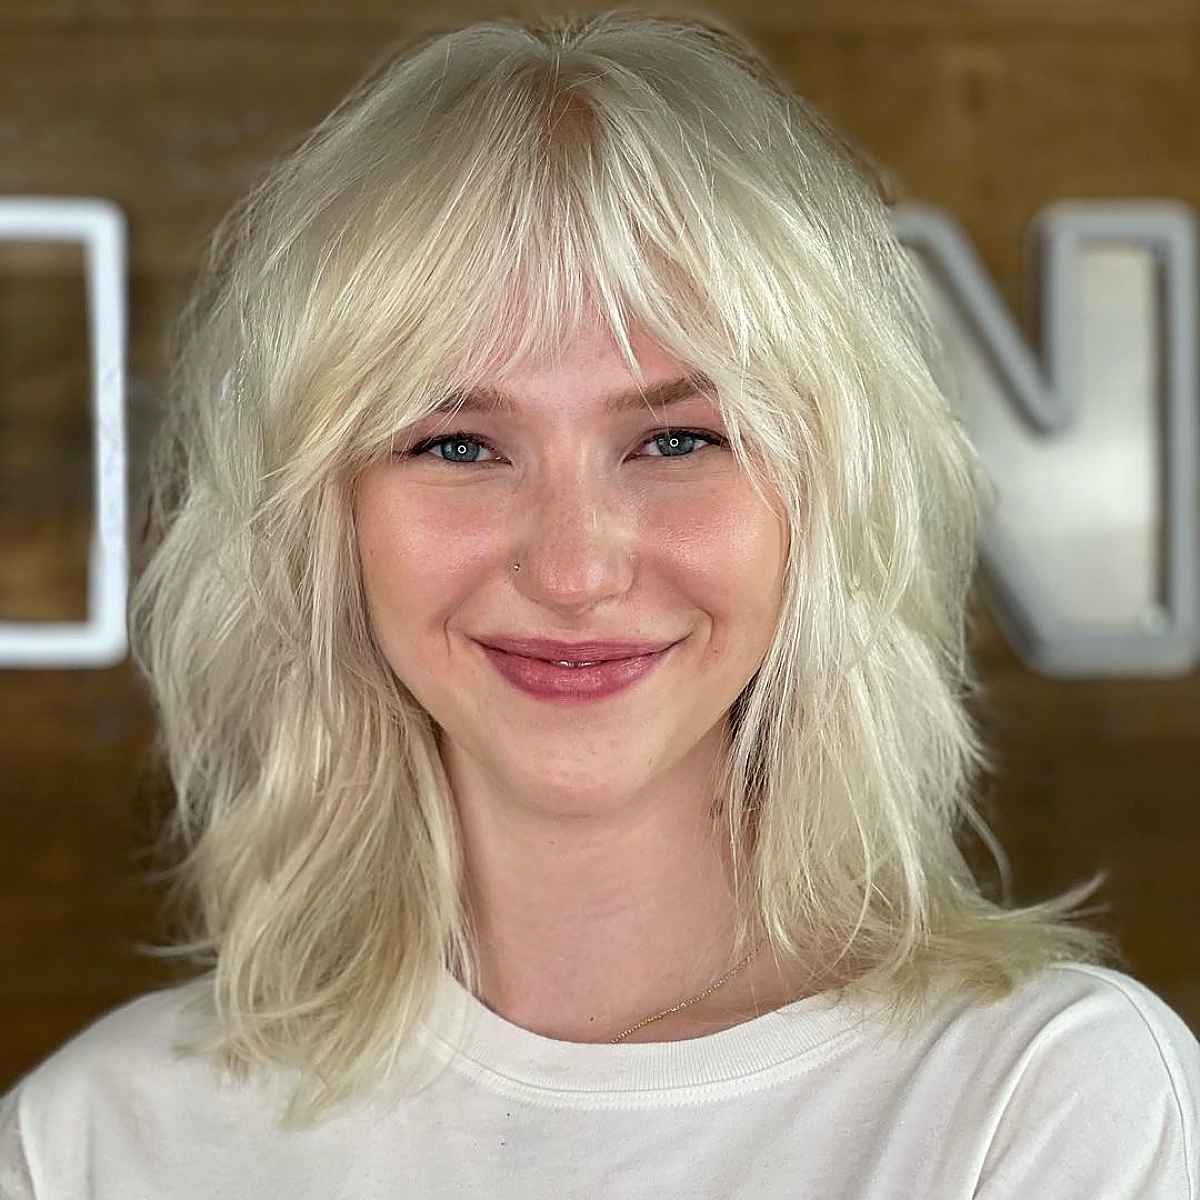 15 Best Ways to Rock a Low-Maintenance Shaggy Haircut with Bangs